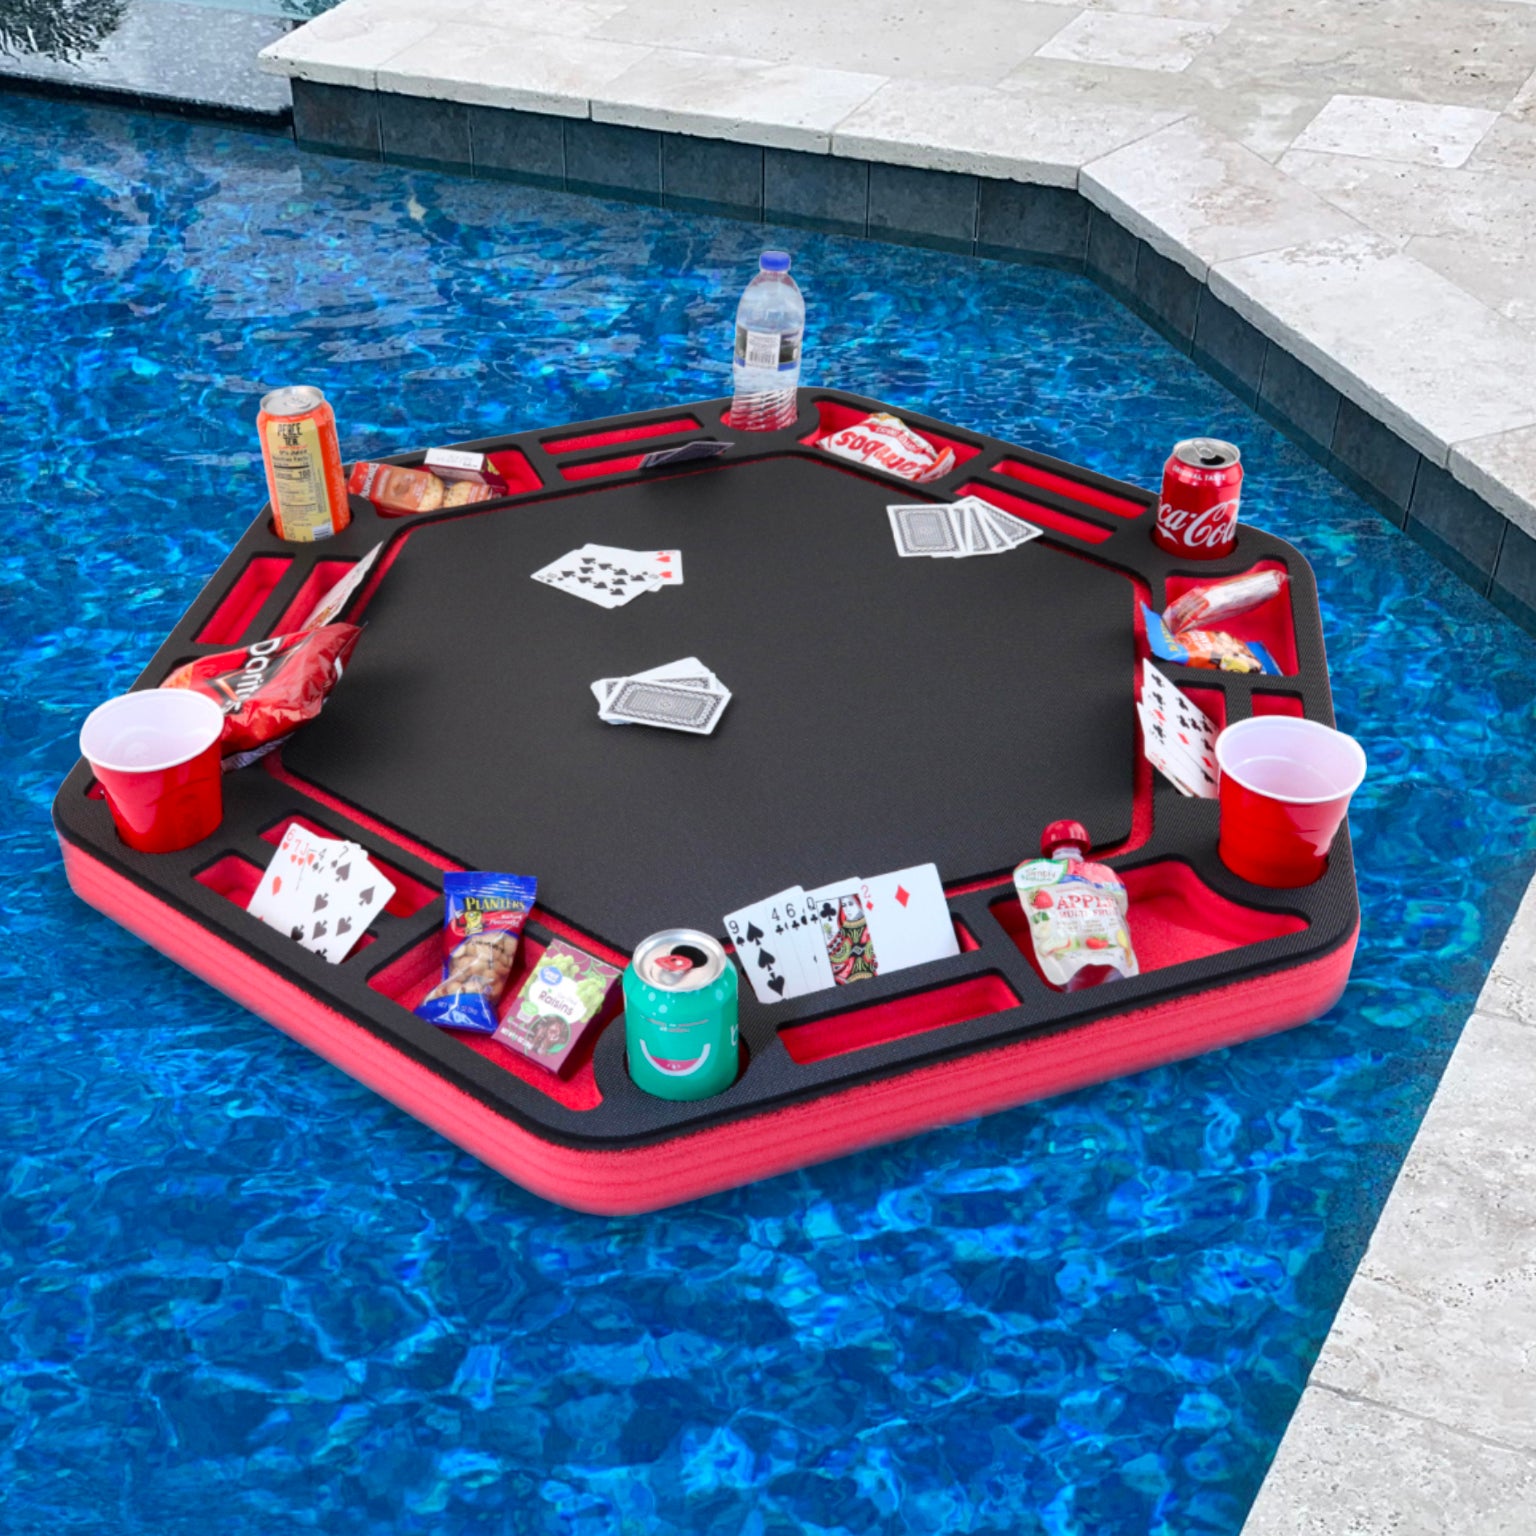 Floating Large Poker Table Red and Black Game Tray for Pool or Beach Float Lounge Durable Foam 40.5 Inch Drink Holders with Waterproof Cards